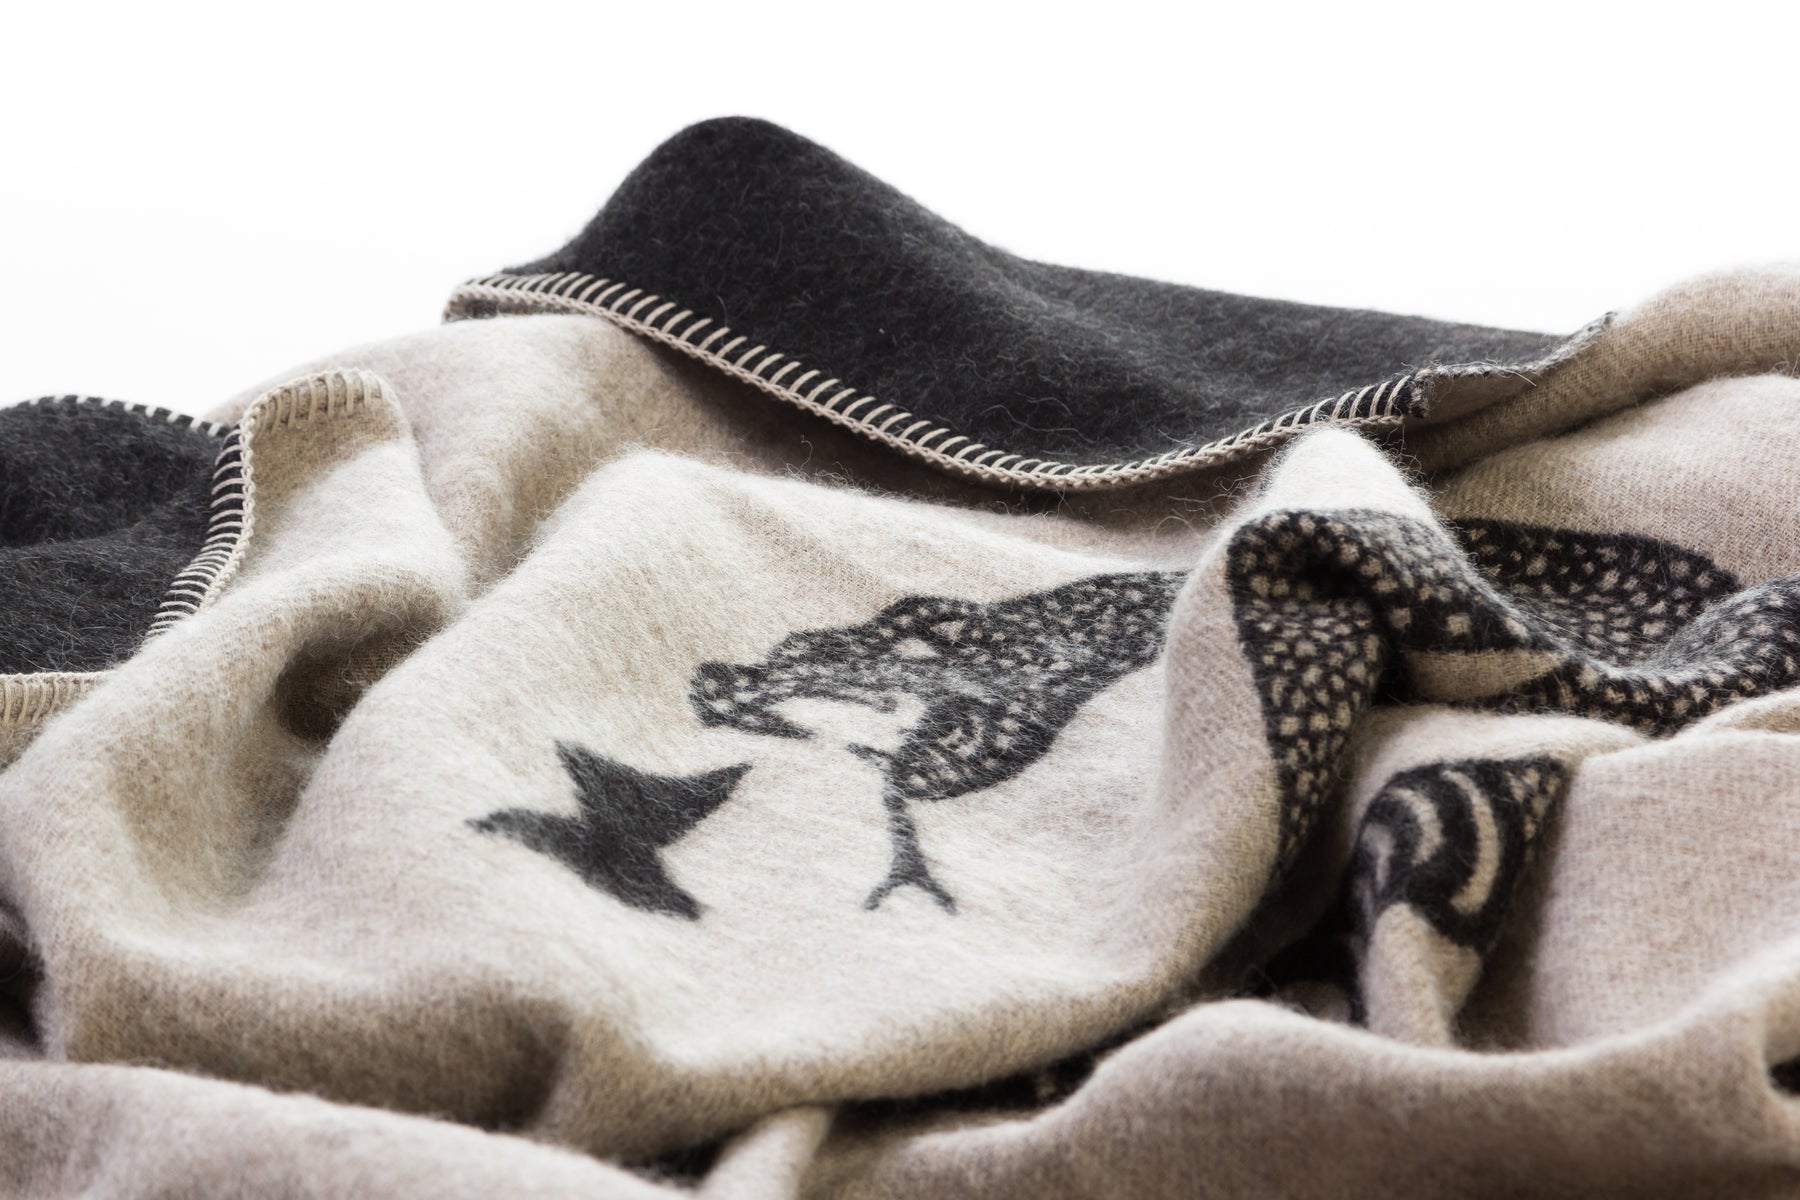 Soft baby alpaca reversible blanket with black and light tan loosely coiled rattlesnake pattern